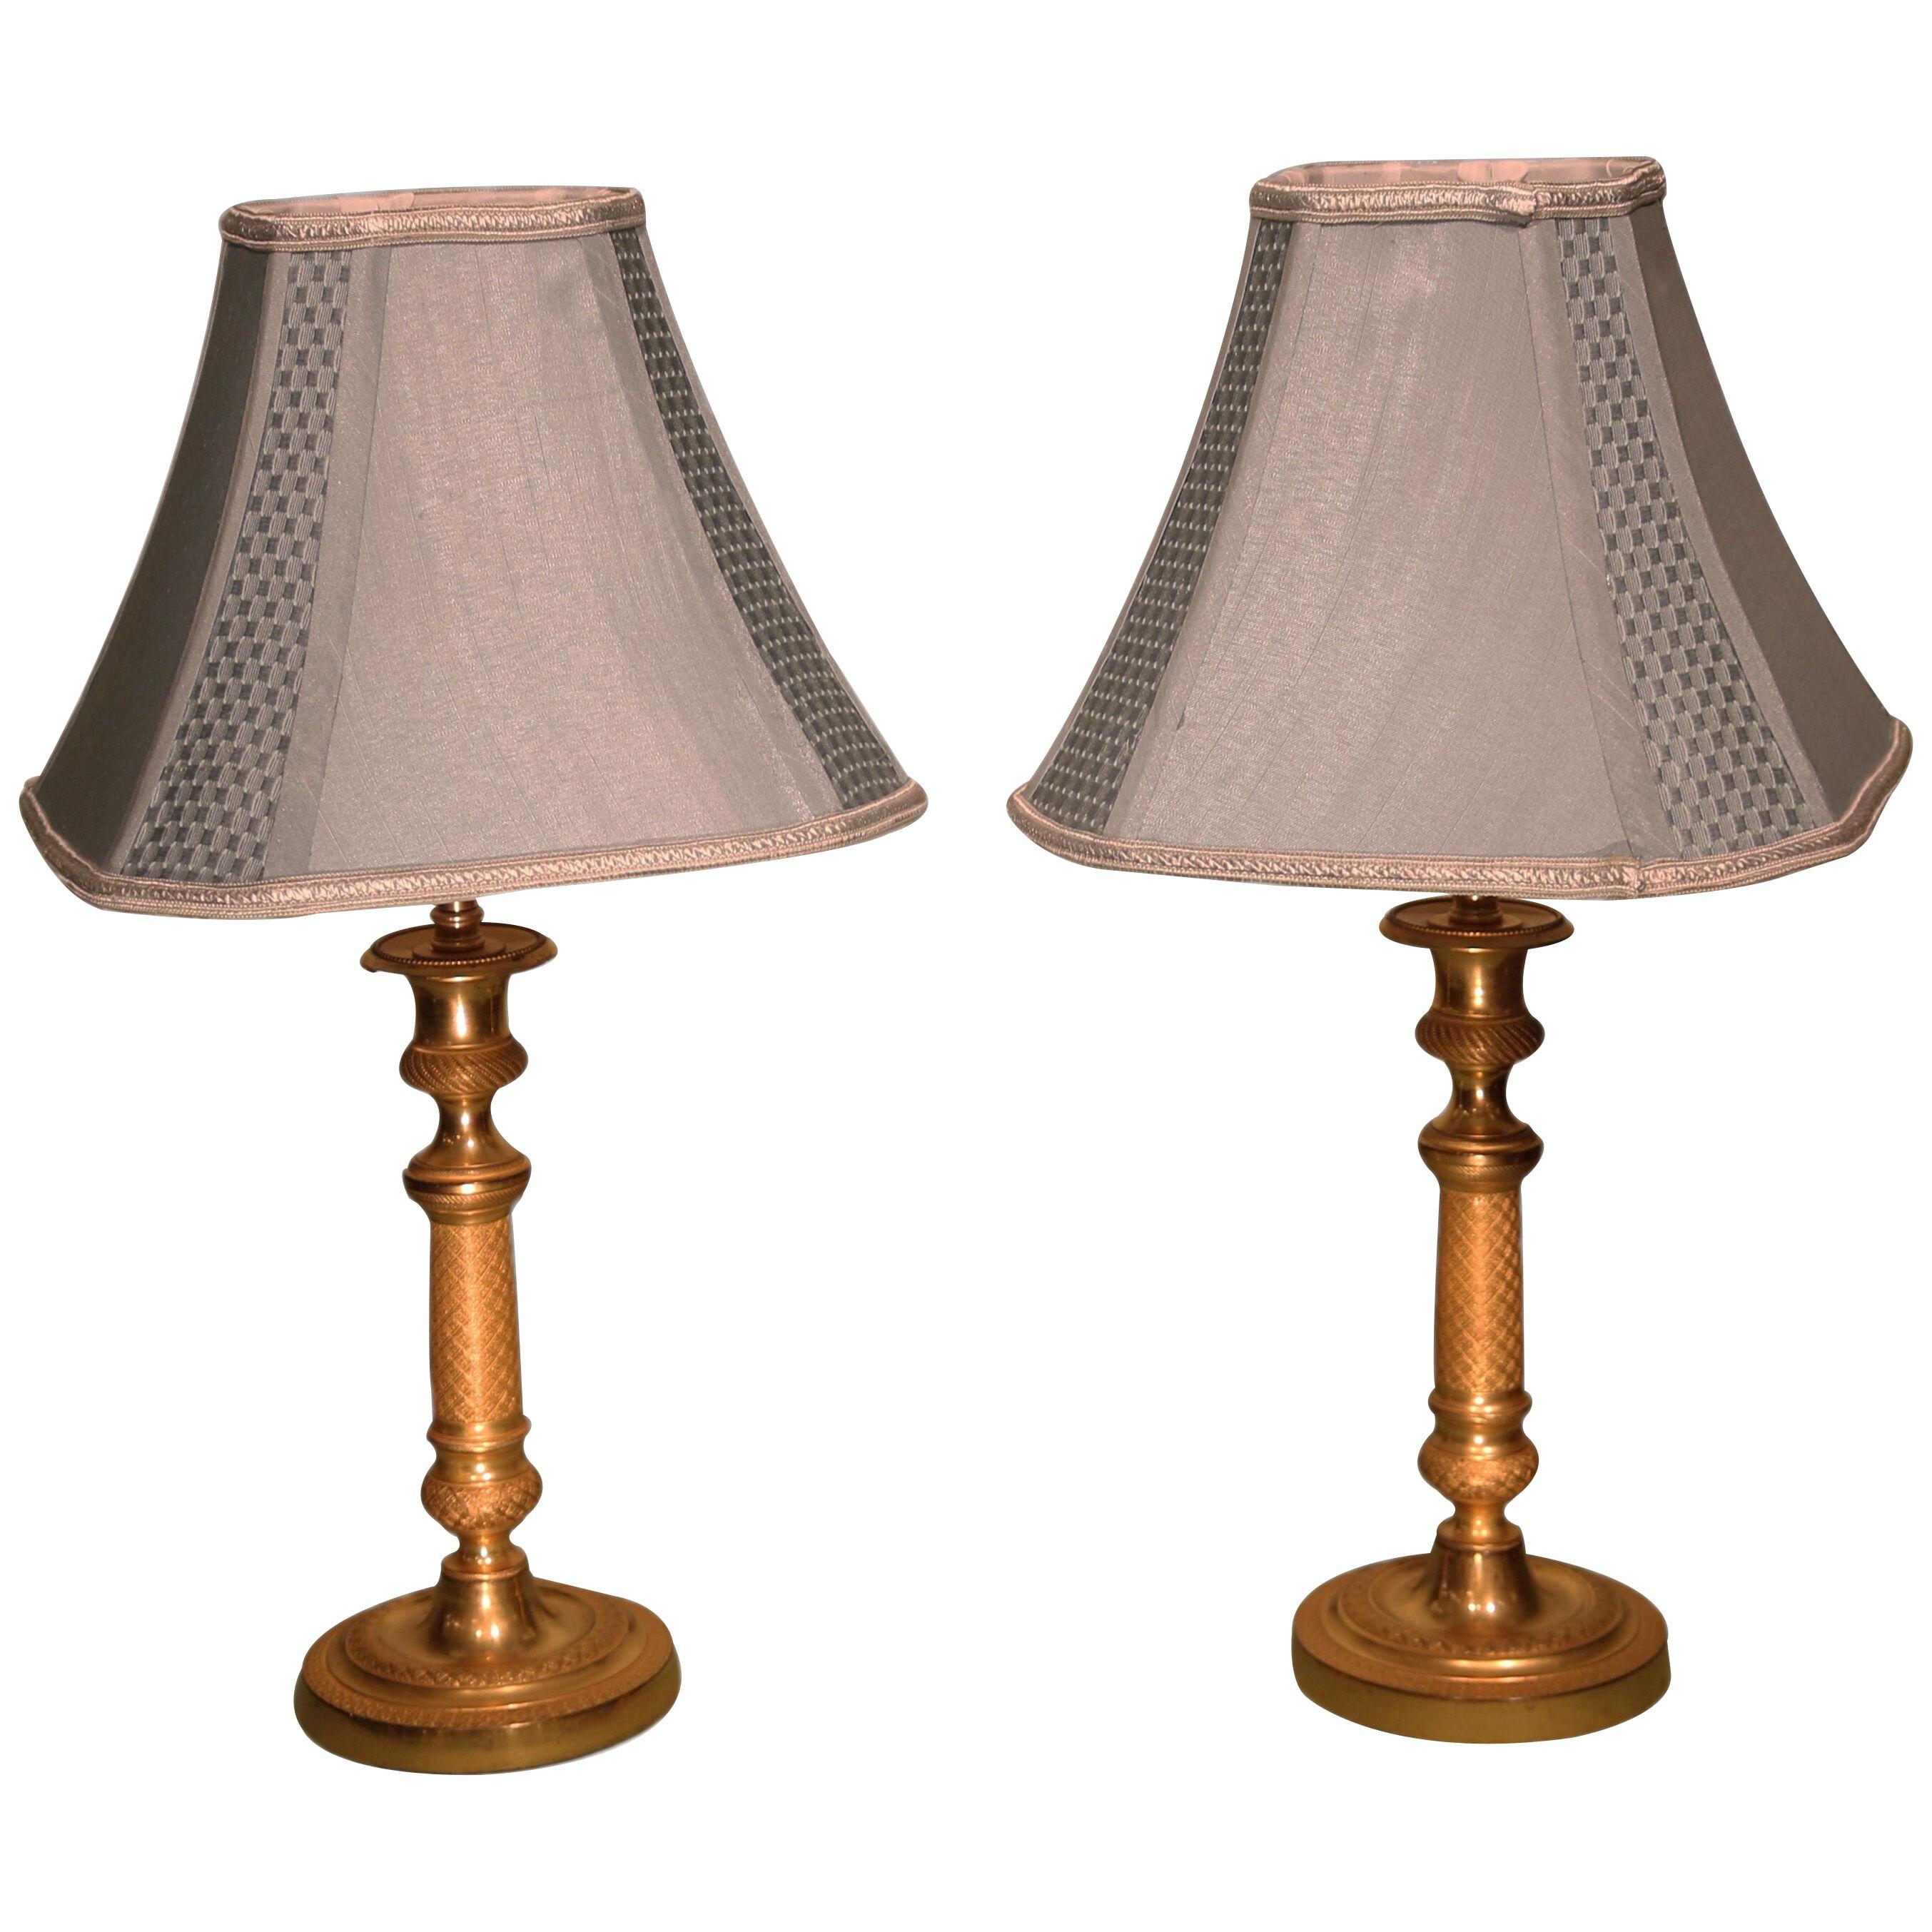 A pair of 19th century ormolu lamps